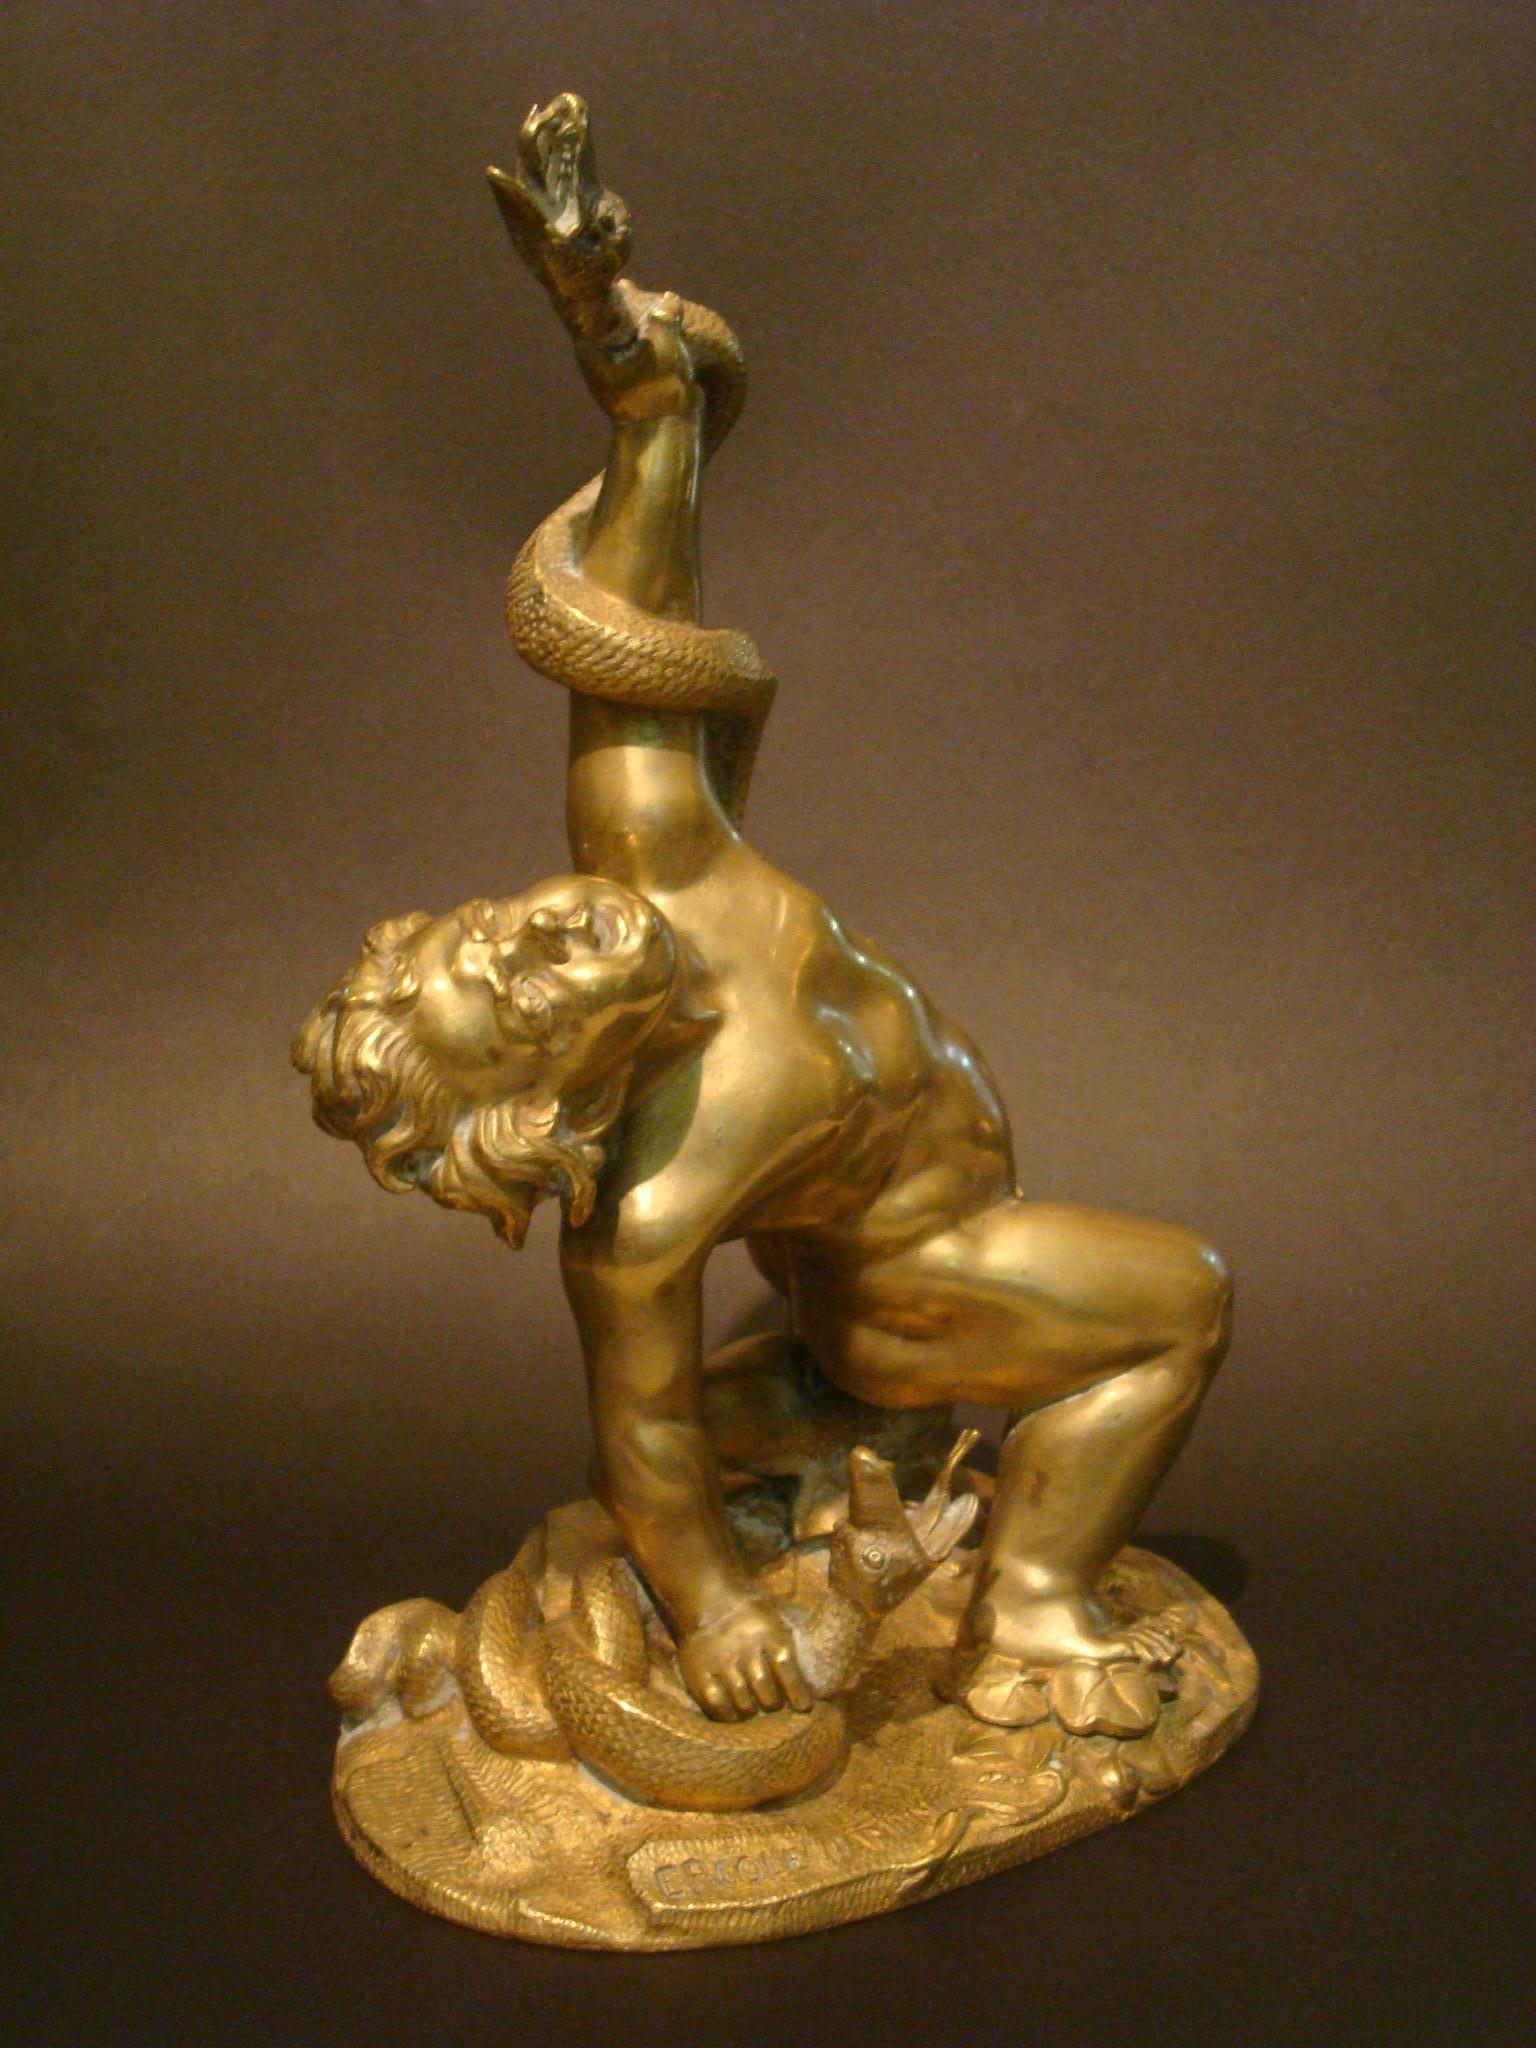 Italian Bronze Sculpture of Infant Hercules Wrestling with Snakes, Italy, 19th Century